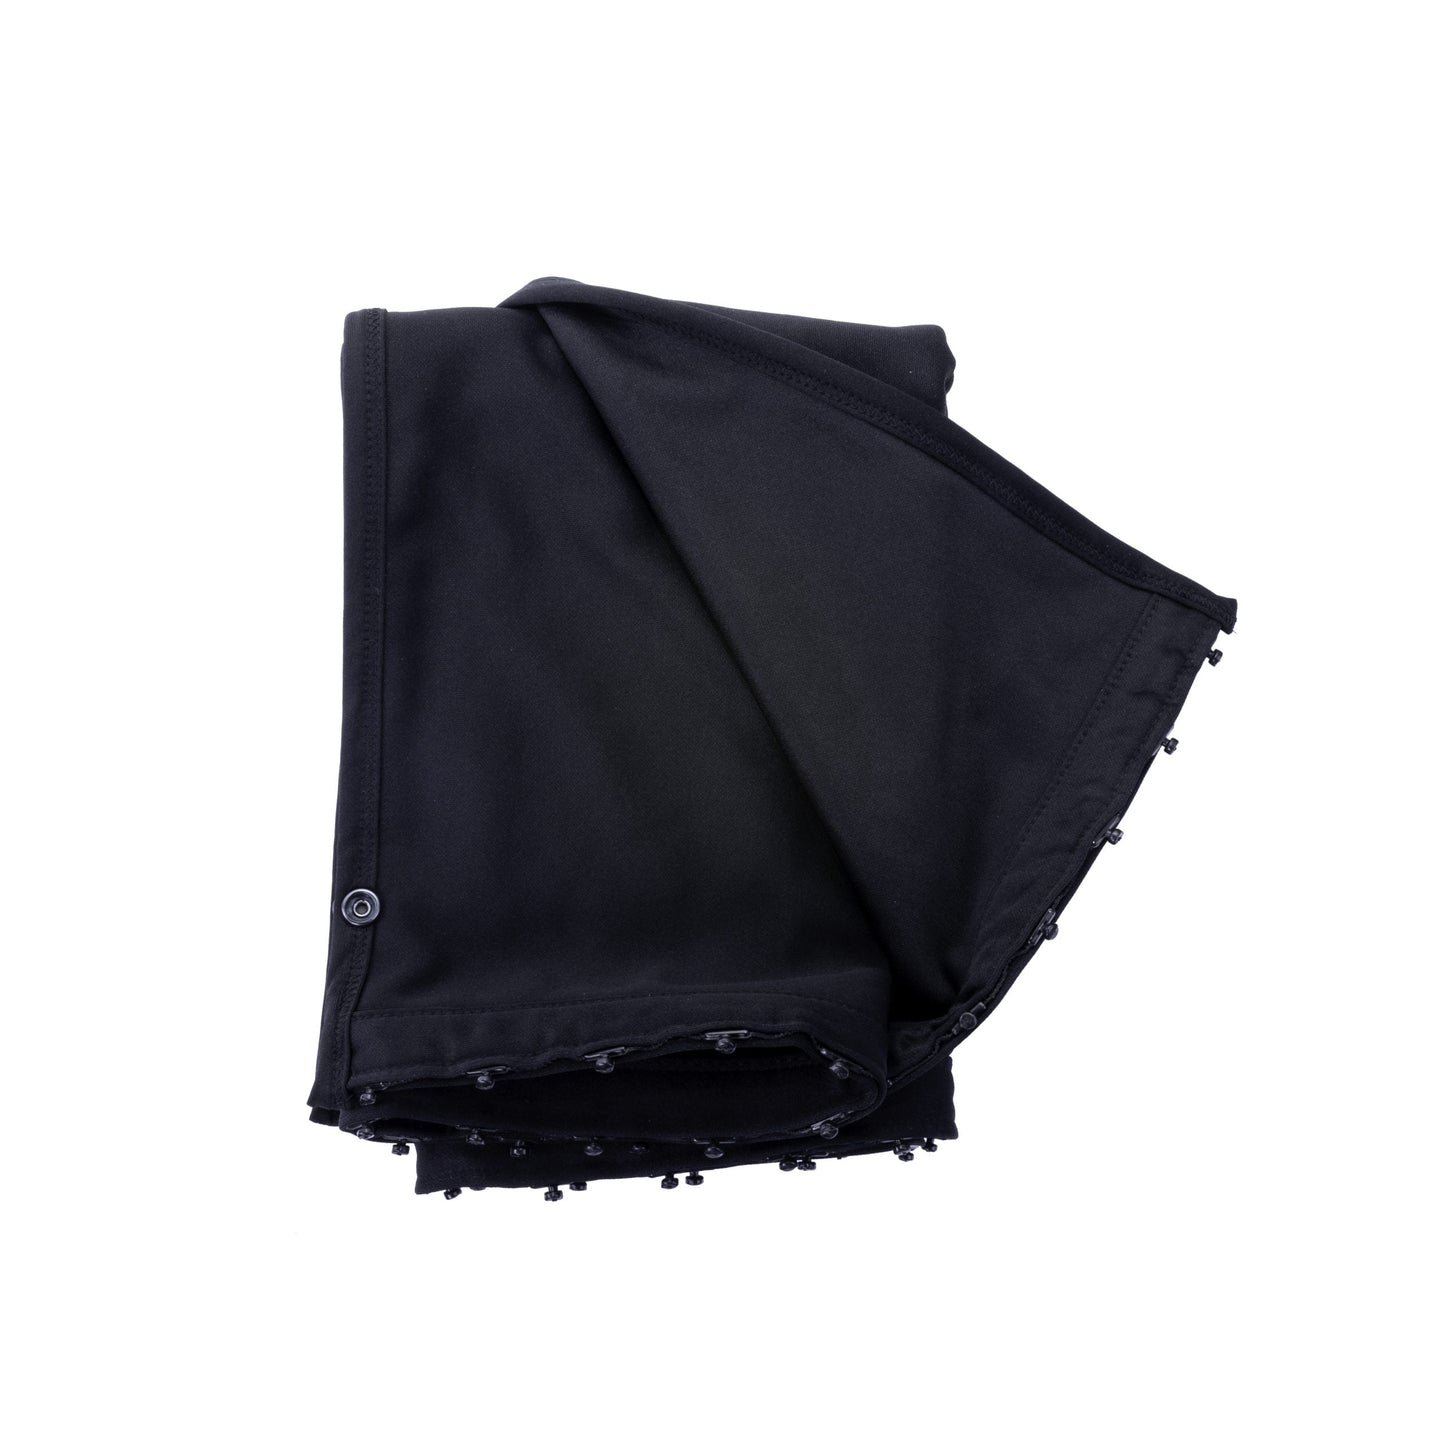 Premium Black-out Curtain Material 75cm For camper conversions Spares for Van-X Curtain kits